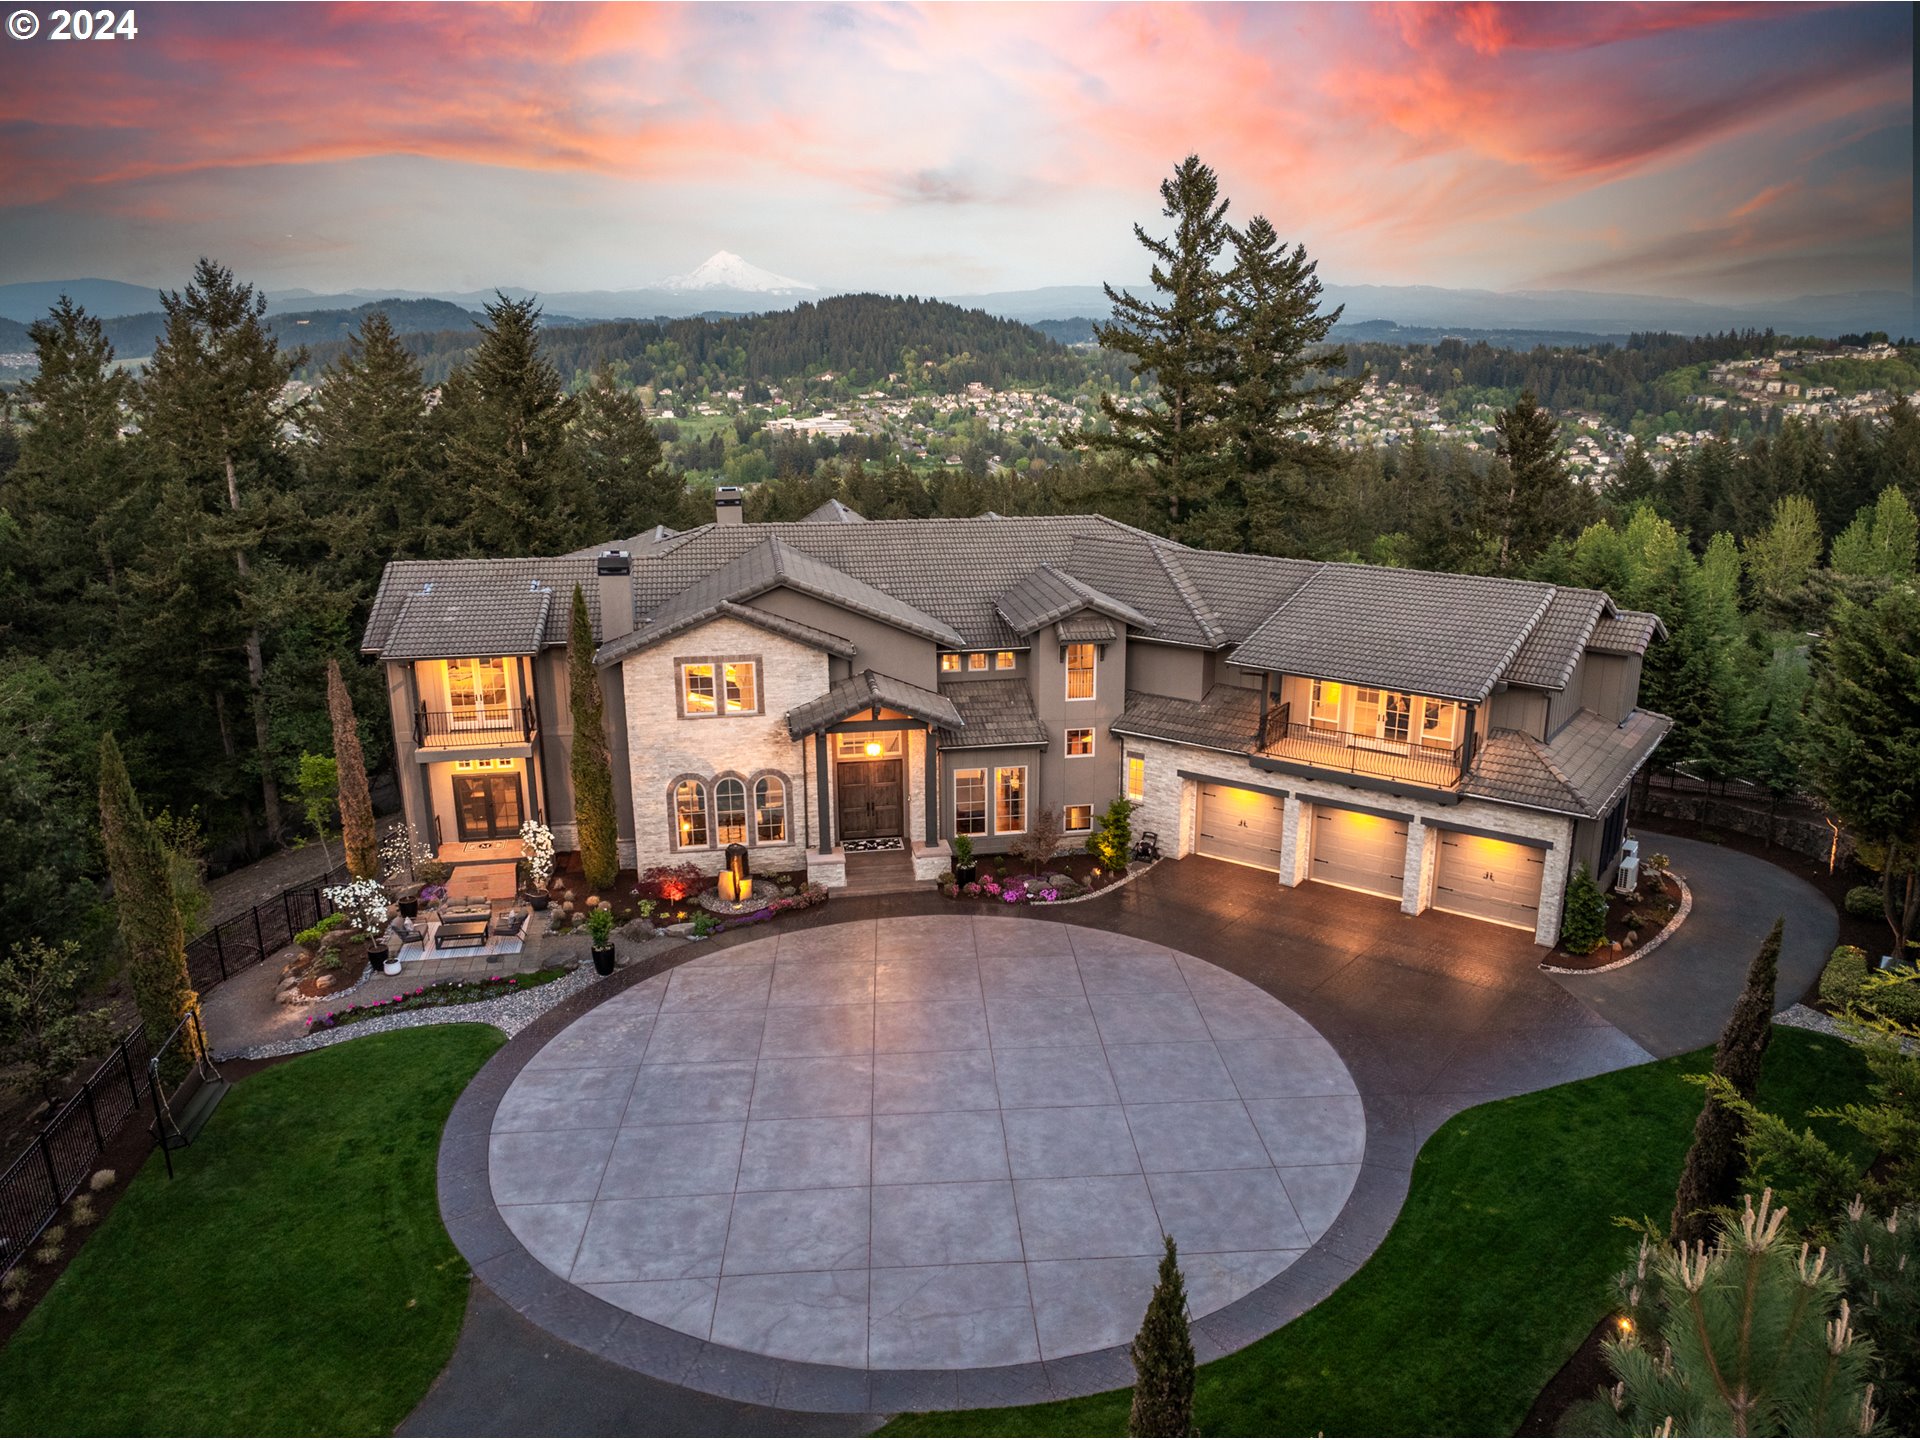 Redefining luxury living in every way, this magnificent custom estate was fully remodeled in 2022 sparing no expense or fine finish and creating a masterpiece to rival its breathtaking Mt Hood views! From the 3 floor elevator to the custom wine cellar and tasting room, private guest apartment, and exceptional high design/use of space, the home enchants at every turn. Wend your way down the private drive and through the gates to find a sleek yet welcoming contemporary refuge adorned with multiple view decks and patios that gaze over the pristine refinished pool and patio gazebo with fireplace. Through the soaring front doors you'll find Mt Hood framed like a work of art through walls of 2 story viewing windows, a spectacular great room with mezzanine landing, showcase kitchen with rich quartzite counters, formal dining with butler's pantry, billiards room with deck, and main level executive office/primary bedroom option with nearby bathroom. Dressed to delight from top to bottom, the enormous upper level primary getaway suite is finished with a sitting room, two fireplaces, glamorous bathroom with dressing room and 2 decks. Enjoy 3 additional plush suites upstairs and a spacious media room with deck. Downstairs you'll enter a world apart with incredible entertaining options including the family room opening to the pool patios, bonus/flex rooms, and full apartment featuring 2nd gourmet kitchen and private entrance. A auto collector's dream with 2 showroom garages offering 6-7 parking spaces and motorcourt, fitness studio, laundry on each level, gleaming hardwoods, up to 21 ft ceilings, and designer lighting - simply unforgettable with undeniable privacy and craftsmanship throughout!